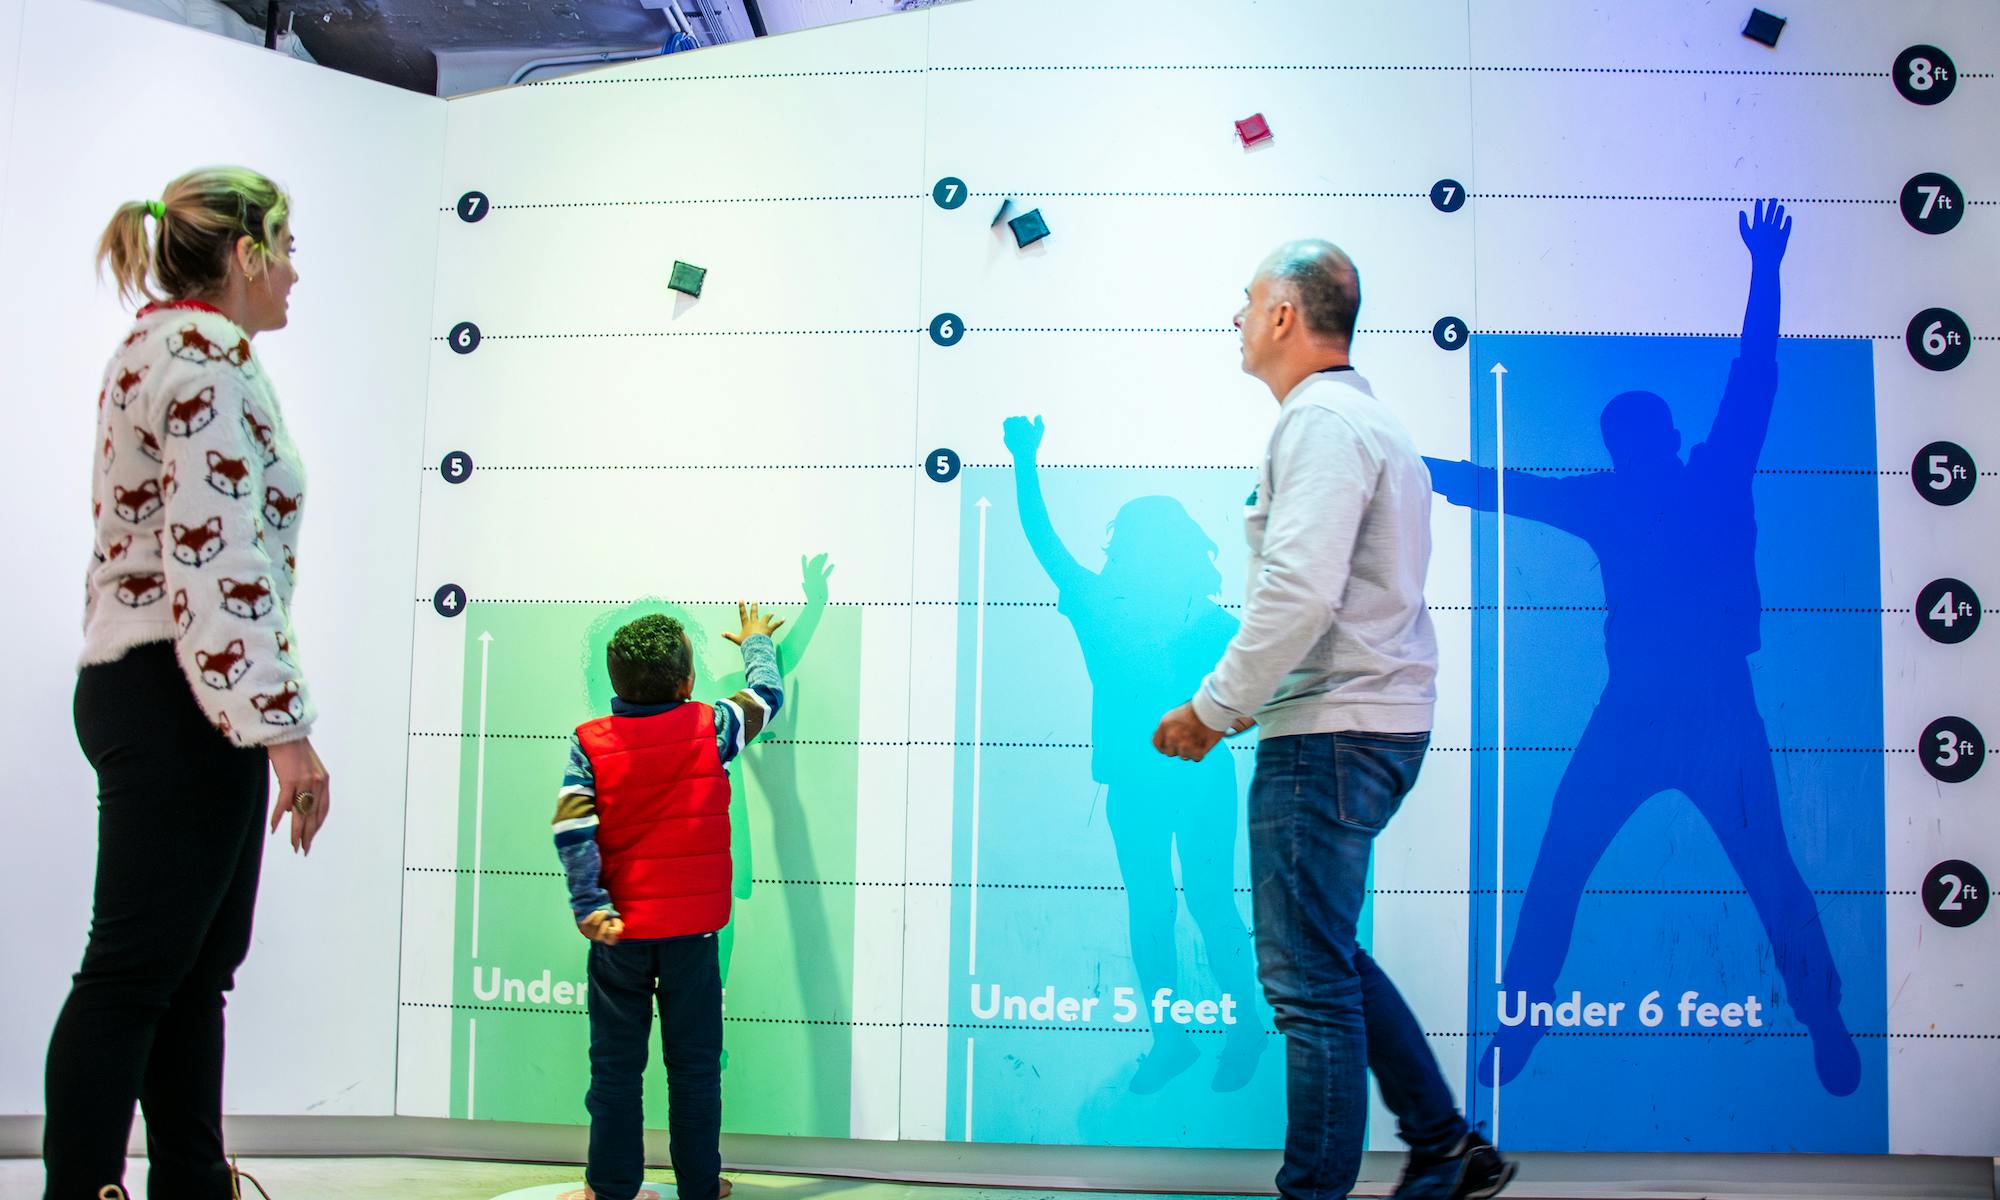 Family at the New Heights jump wall in the Data Science Alley exhibit